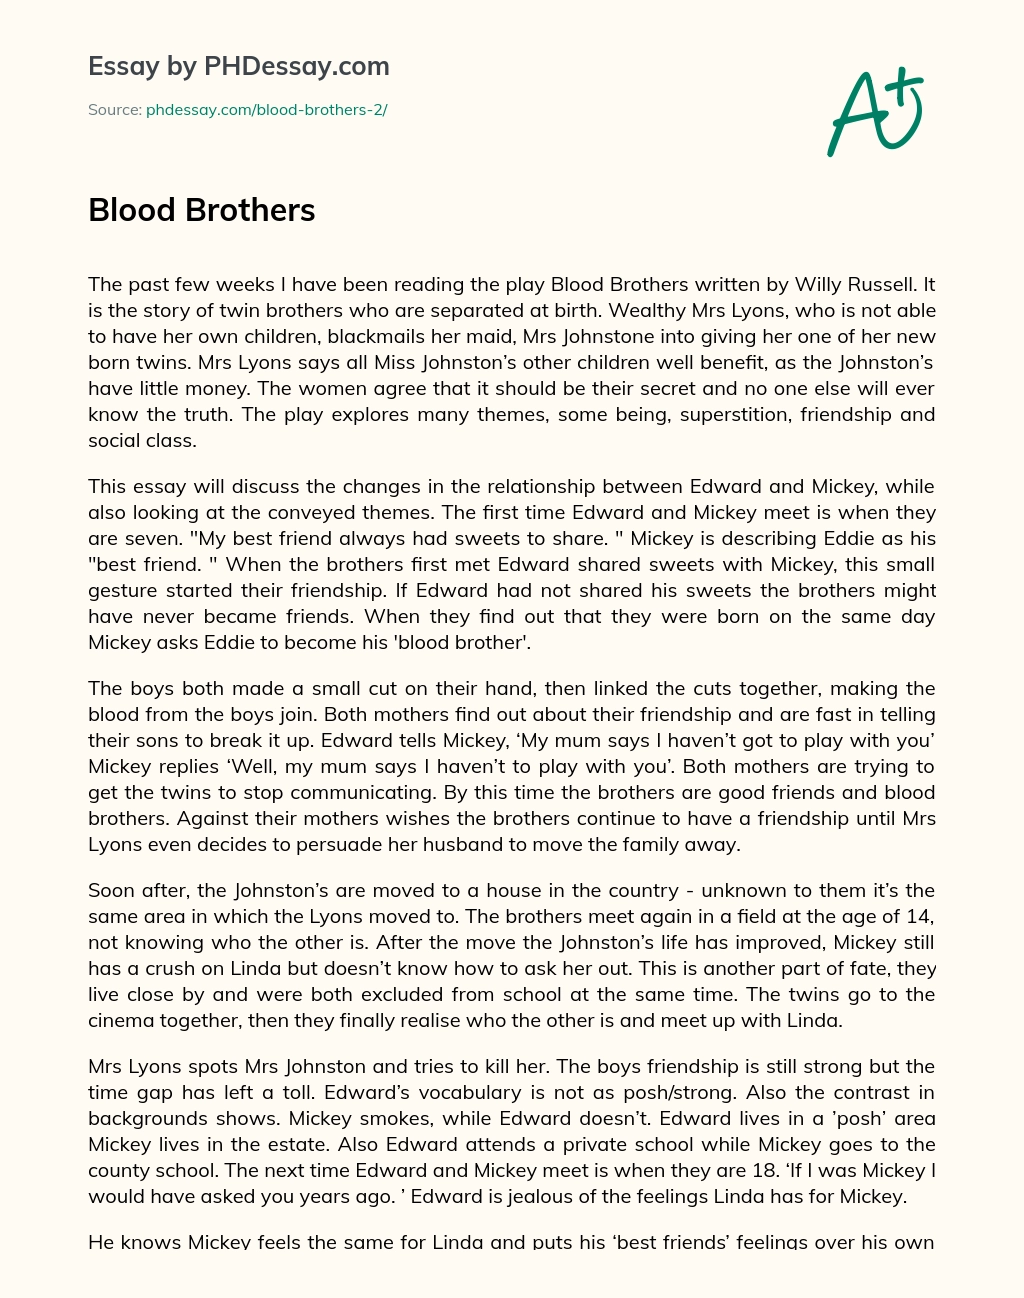 blood brothers example essay